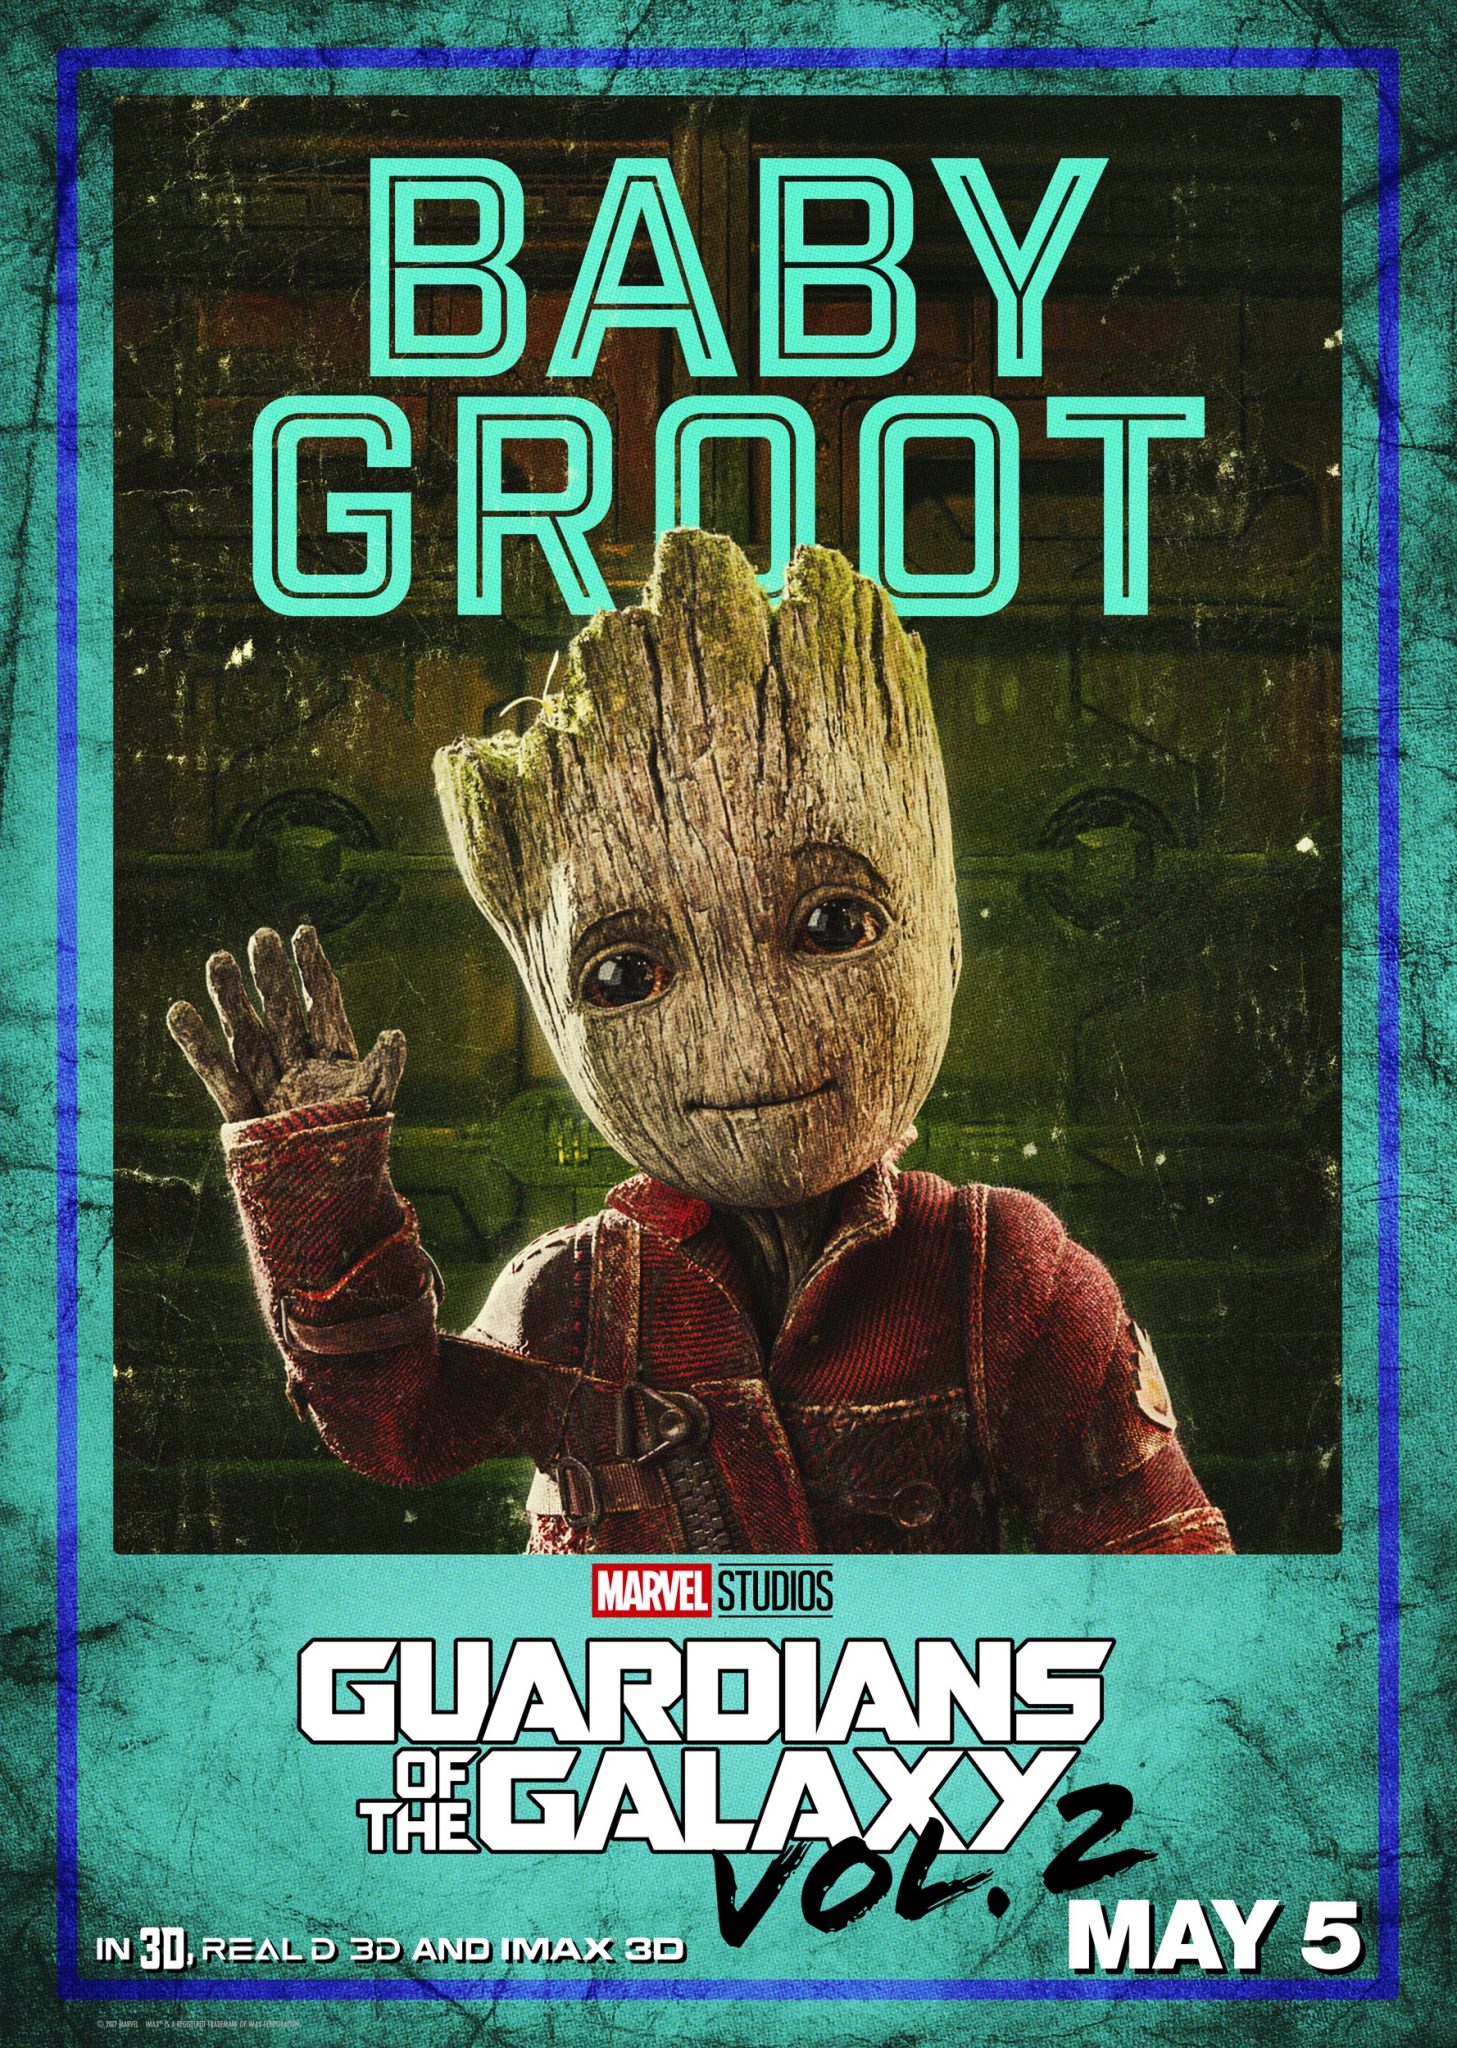 Guardians of the Galaxy Vol. 2 Tickets Now on Sale!